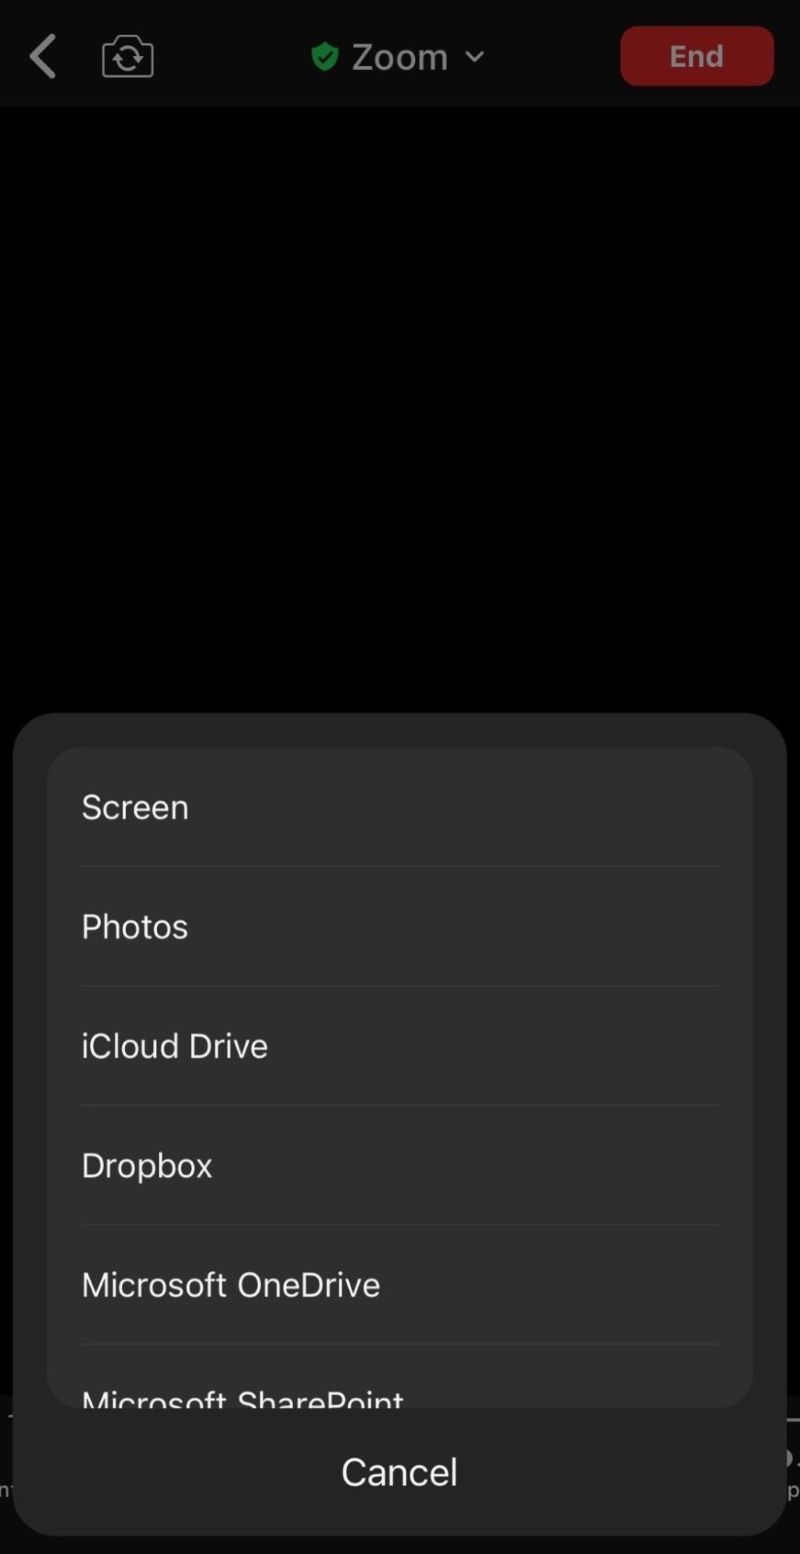 list of options to share in the Zoom mobile app